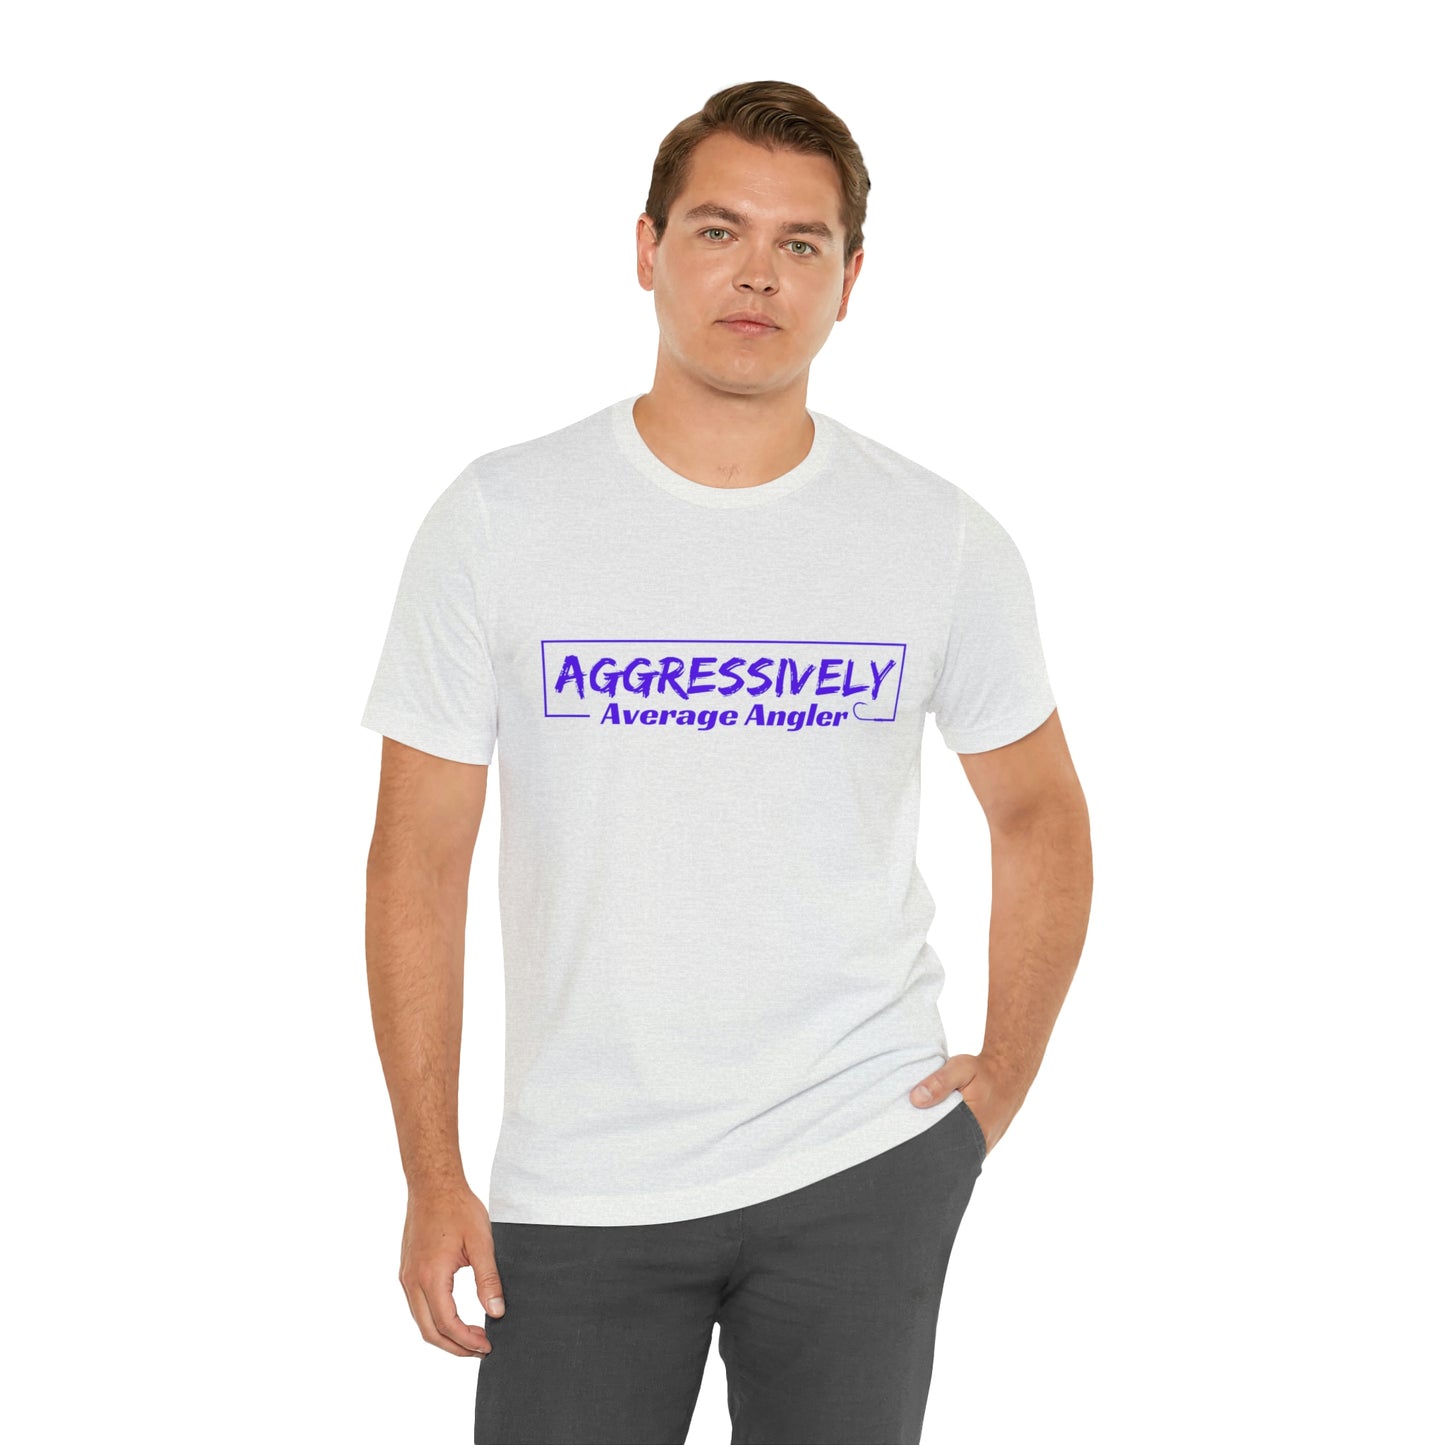 Aggressively Average Angler Tee (Light colors)